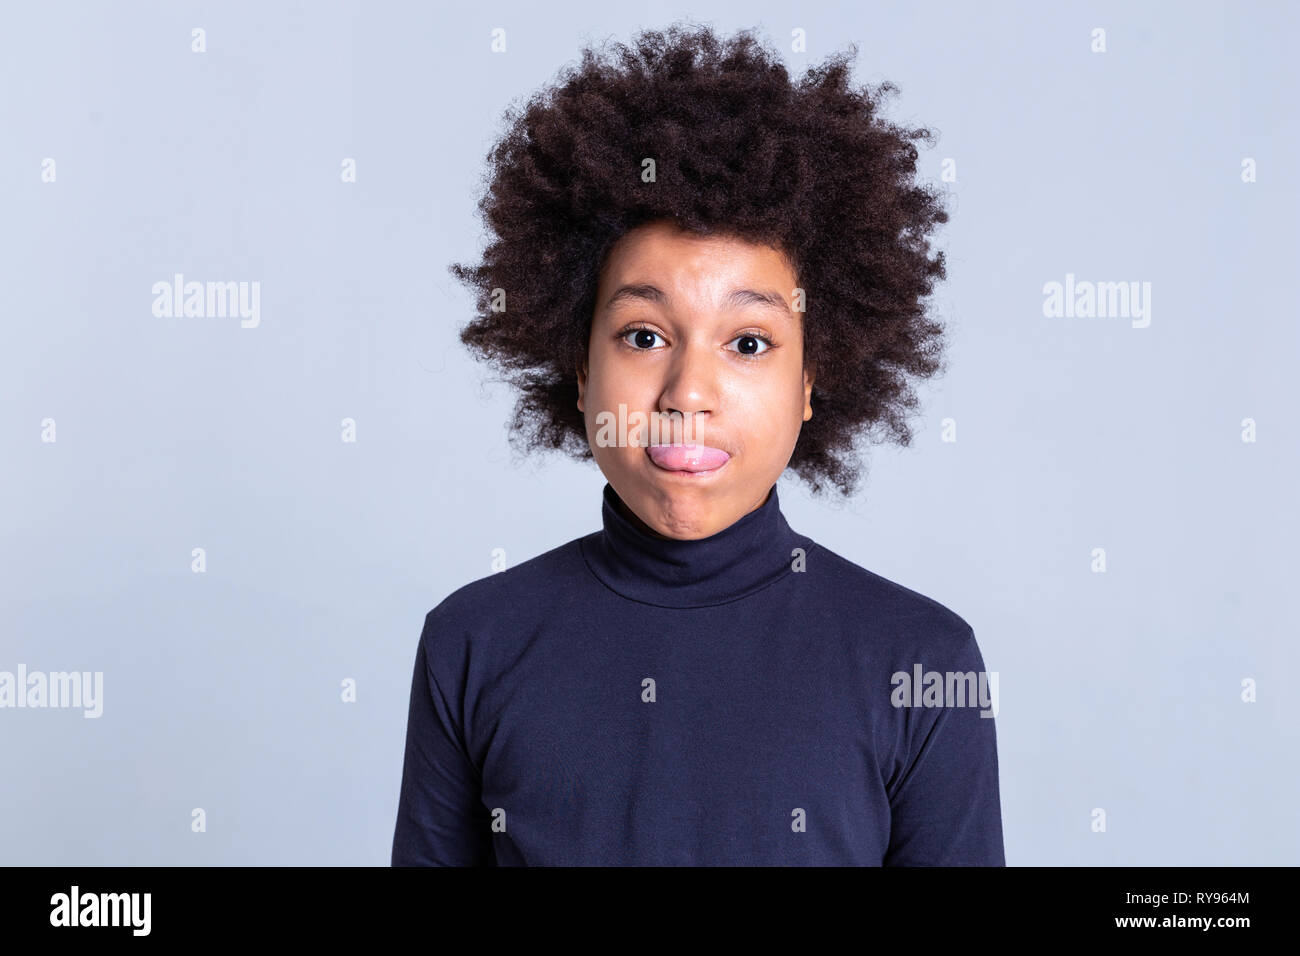 Childish young boy with afro hairstyle exposing his tongue Stock Photo